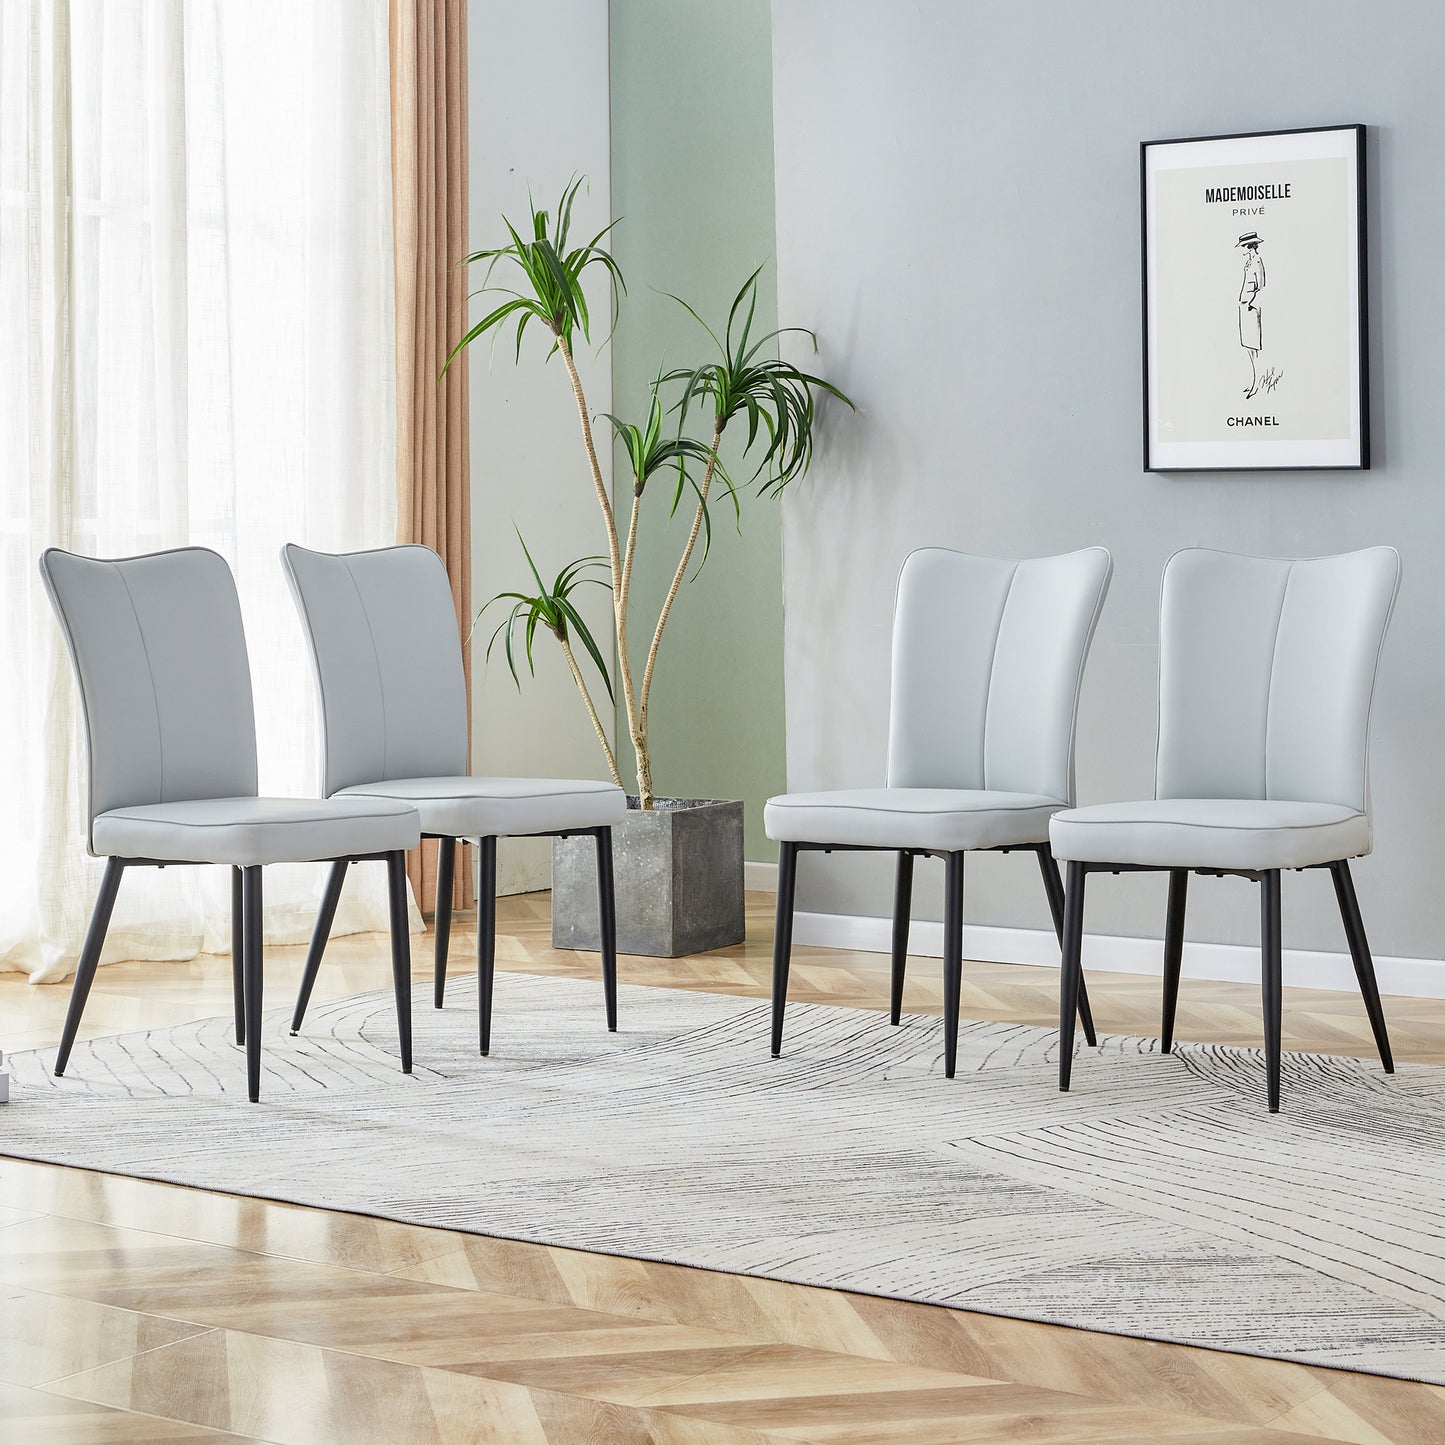 Phelps minimalist dining chairs in Light Gray. (Set of 4)